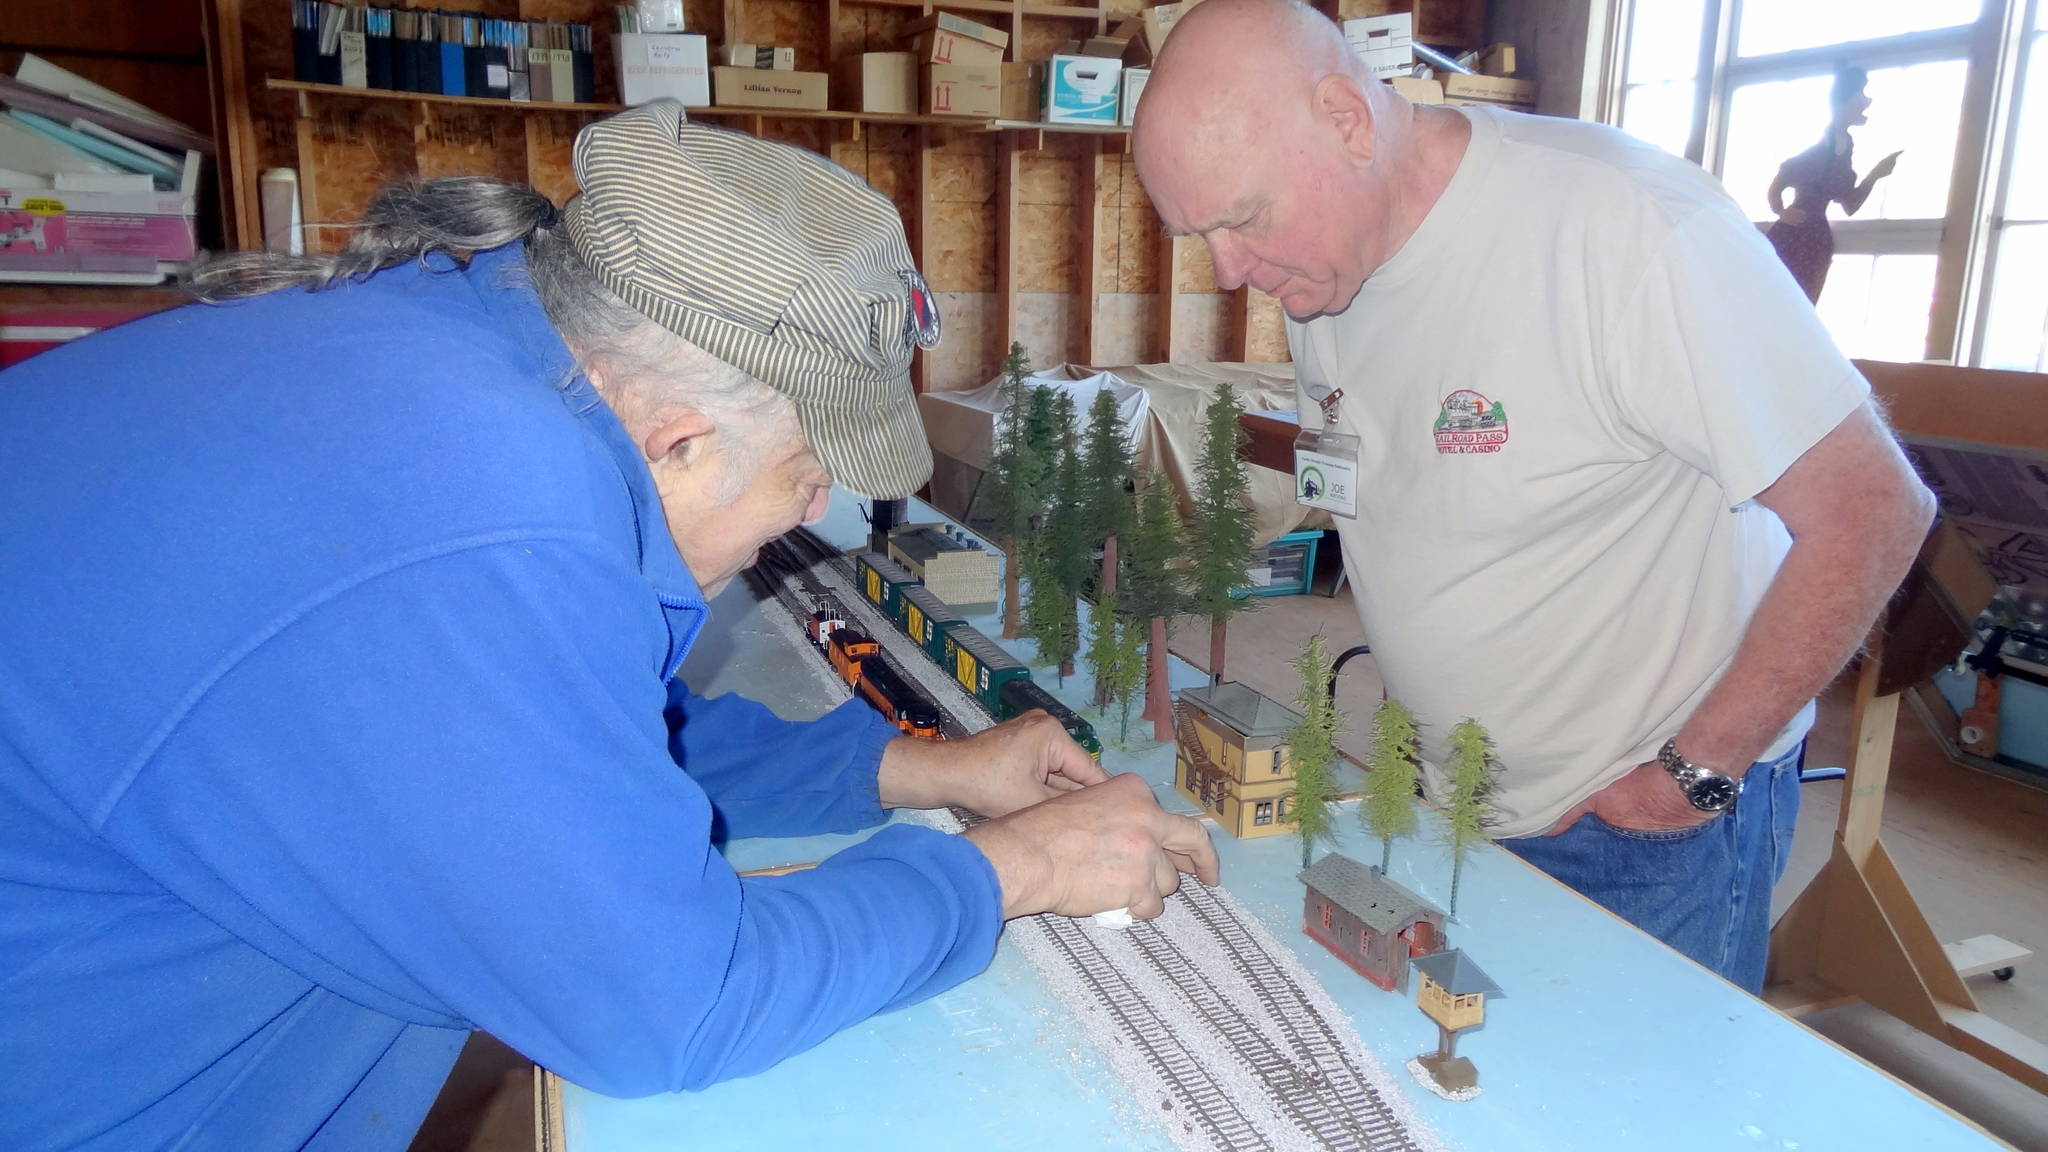 Club members of the North Olympic Peninsula Railroaders began work in 2013 on a model of the Milwaukee Railroad system that ran in the area, and they hope to continue the work elsewhere in a donated space in the Sequim or Port Angeles areas. (Matthew Nash/Olympic Peninsula News Group file)